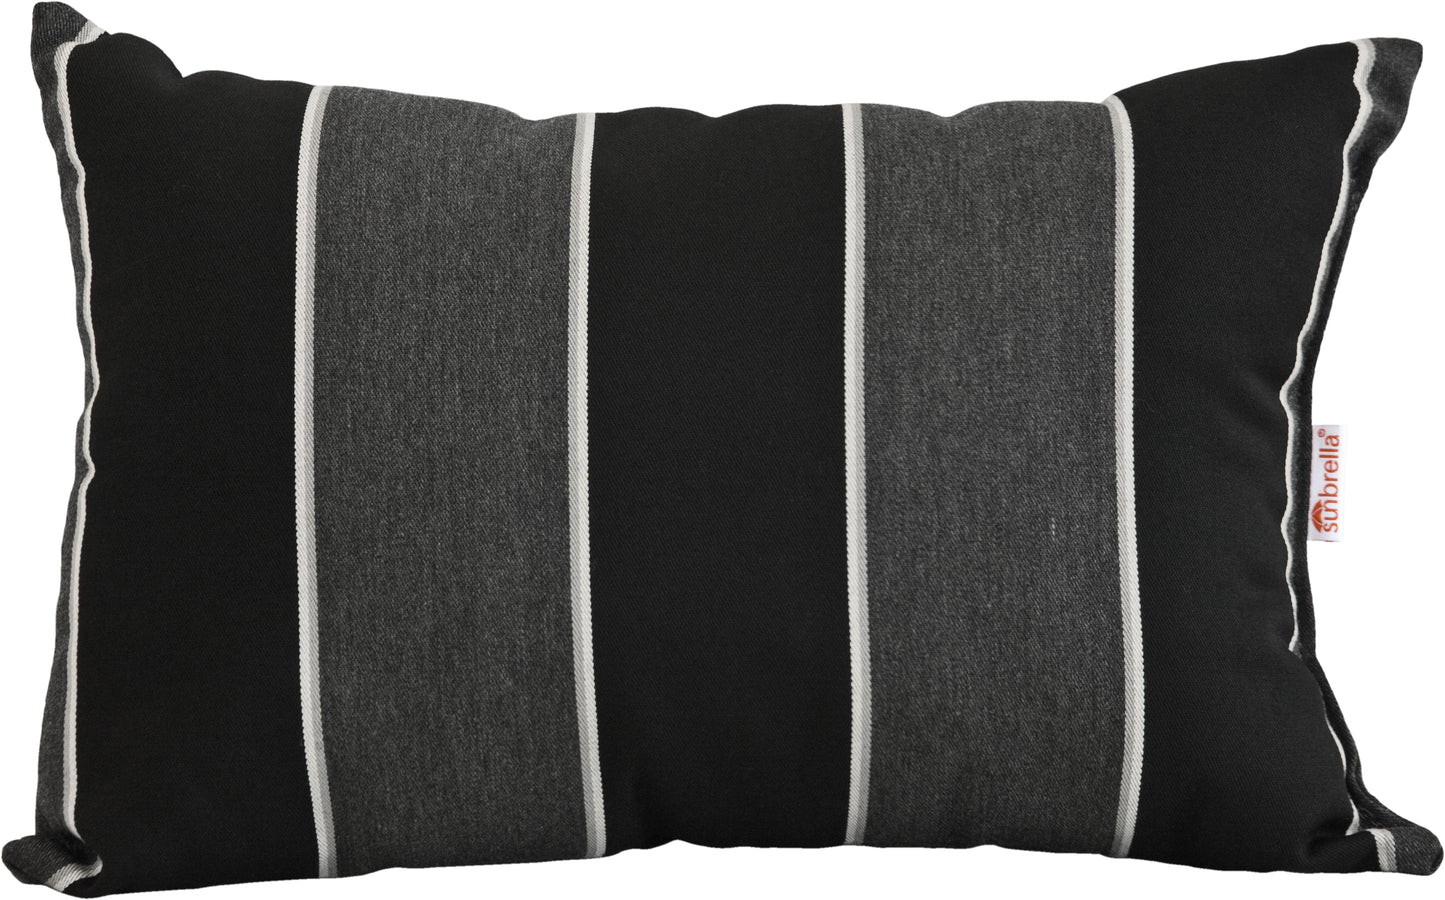 LuxCraft Lumbar Pillow  - LEAD TIME TO SHIP 10 to 12 BUSINESS DAYS